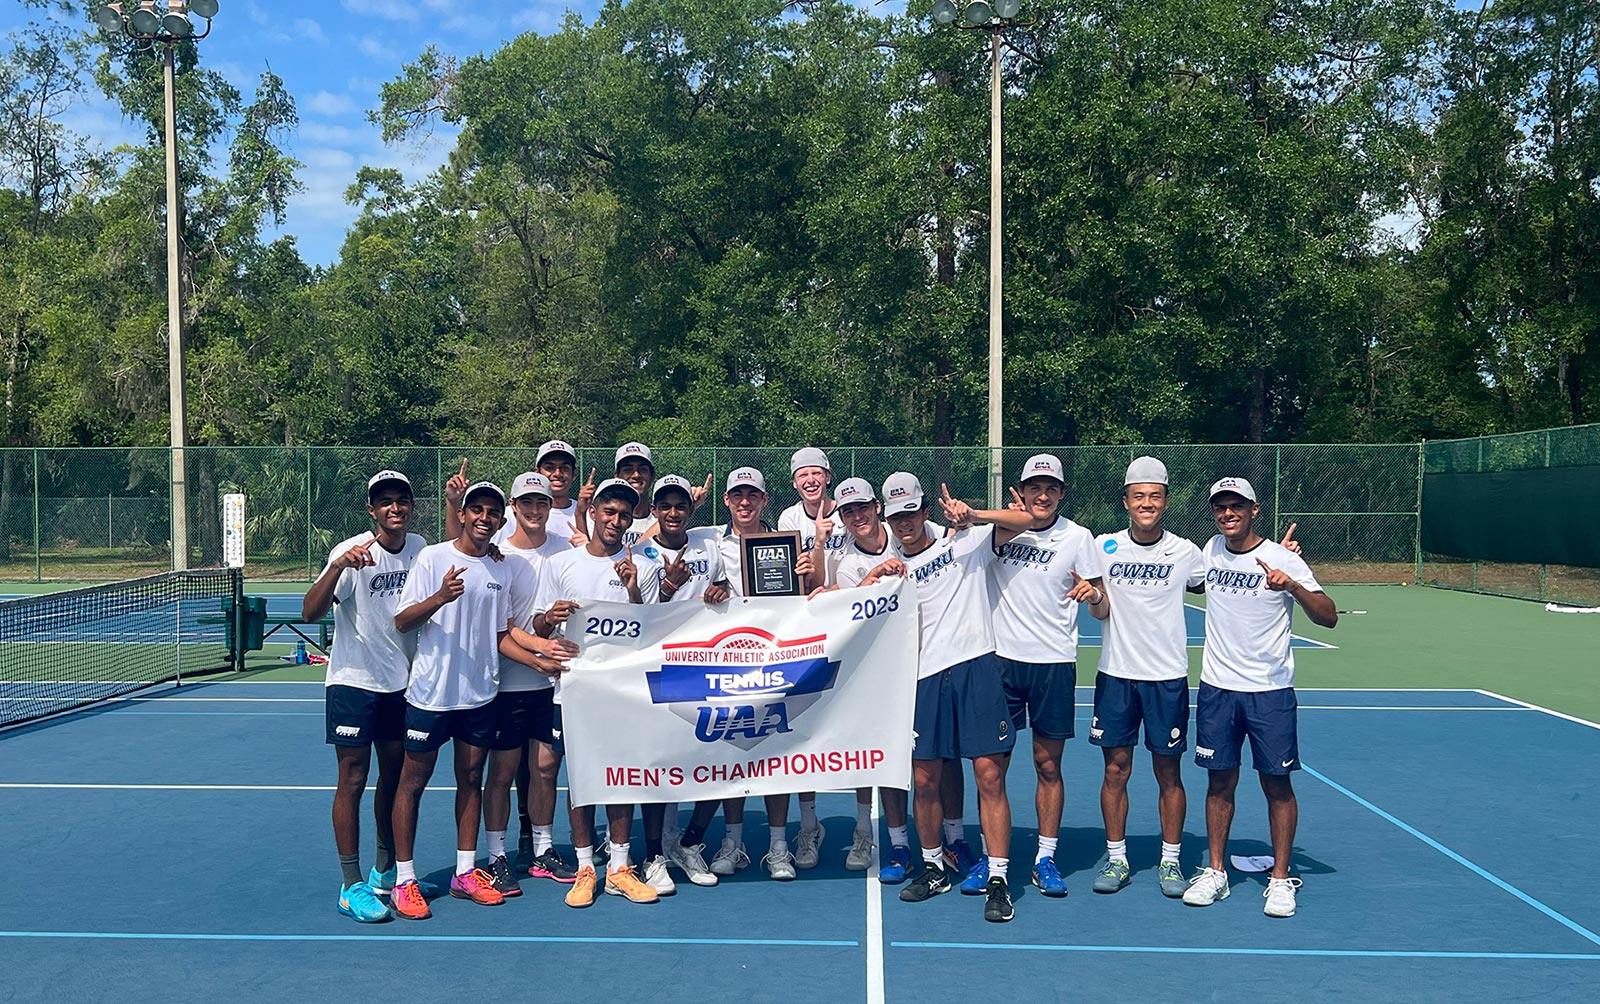 The men’s tennis team in a group photo holding a large sign showing they are won the University Athletic Associationship Championship.